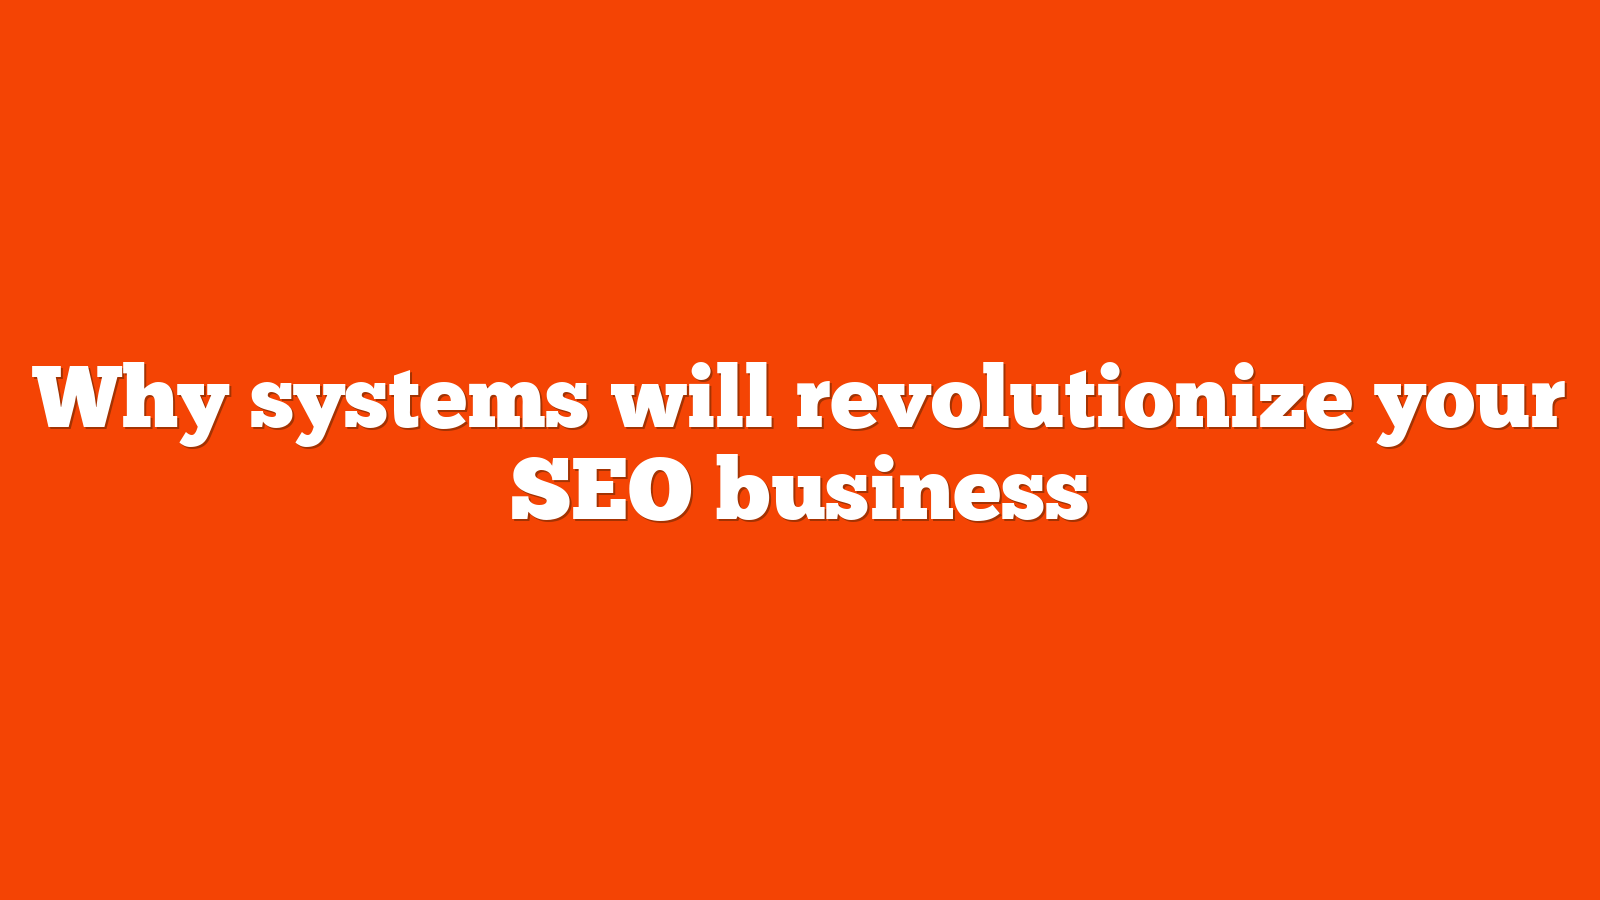 Why systems will revolutionize your SEO business